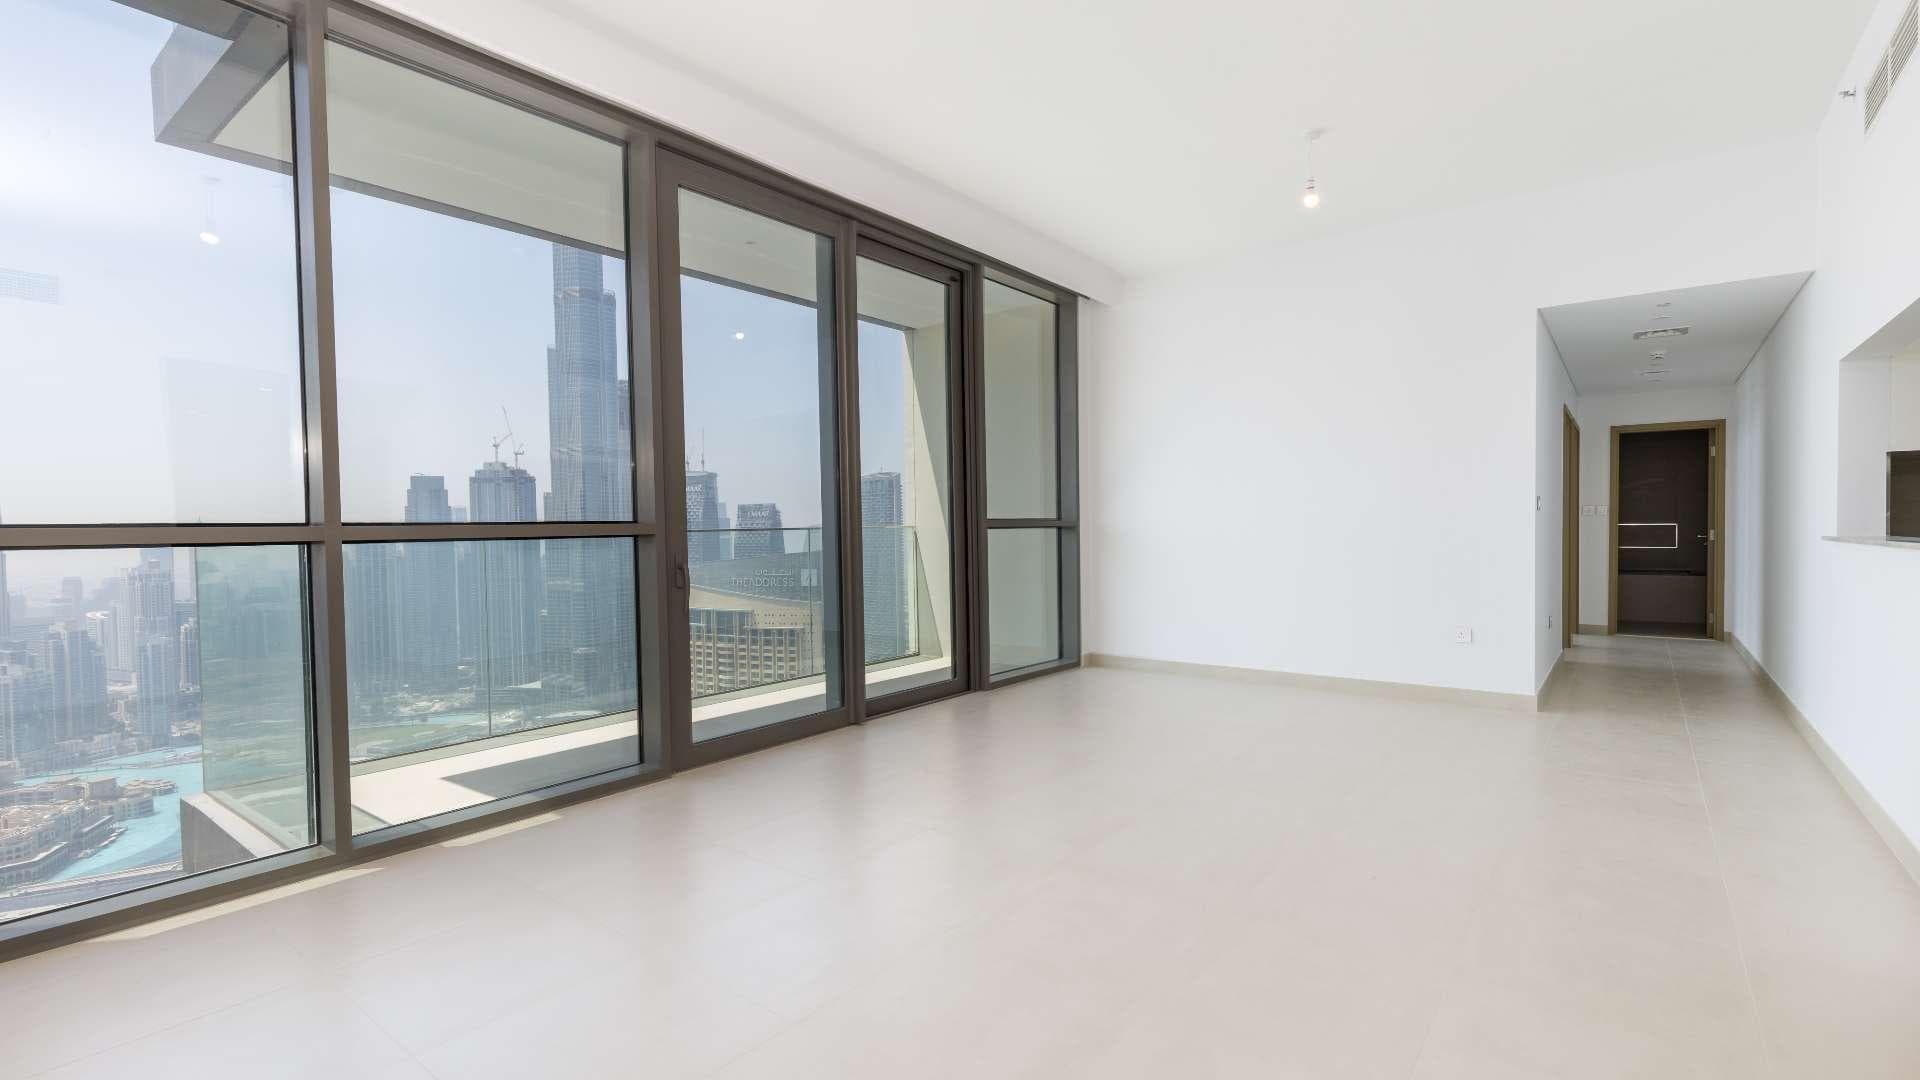 3 Bedroom Apartment For Sale Downtown Views Lp12612 2eb46595820a1000.jpg